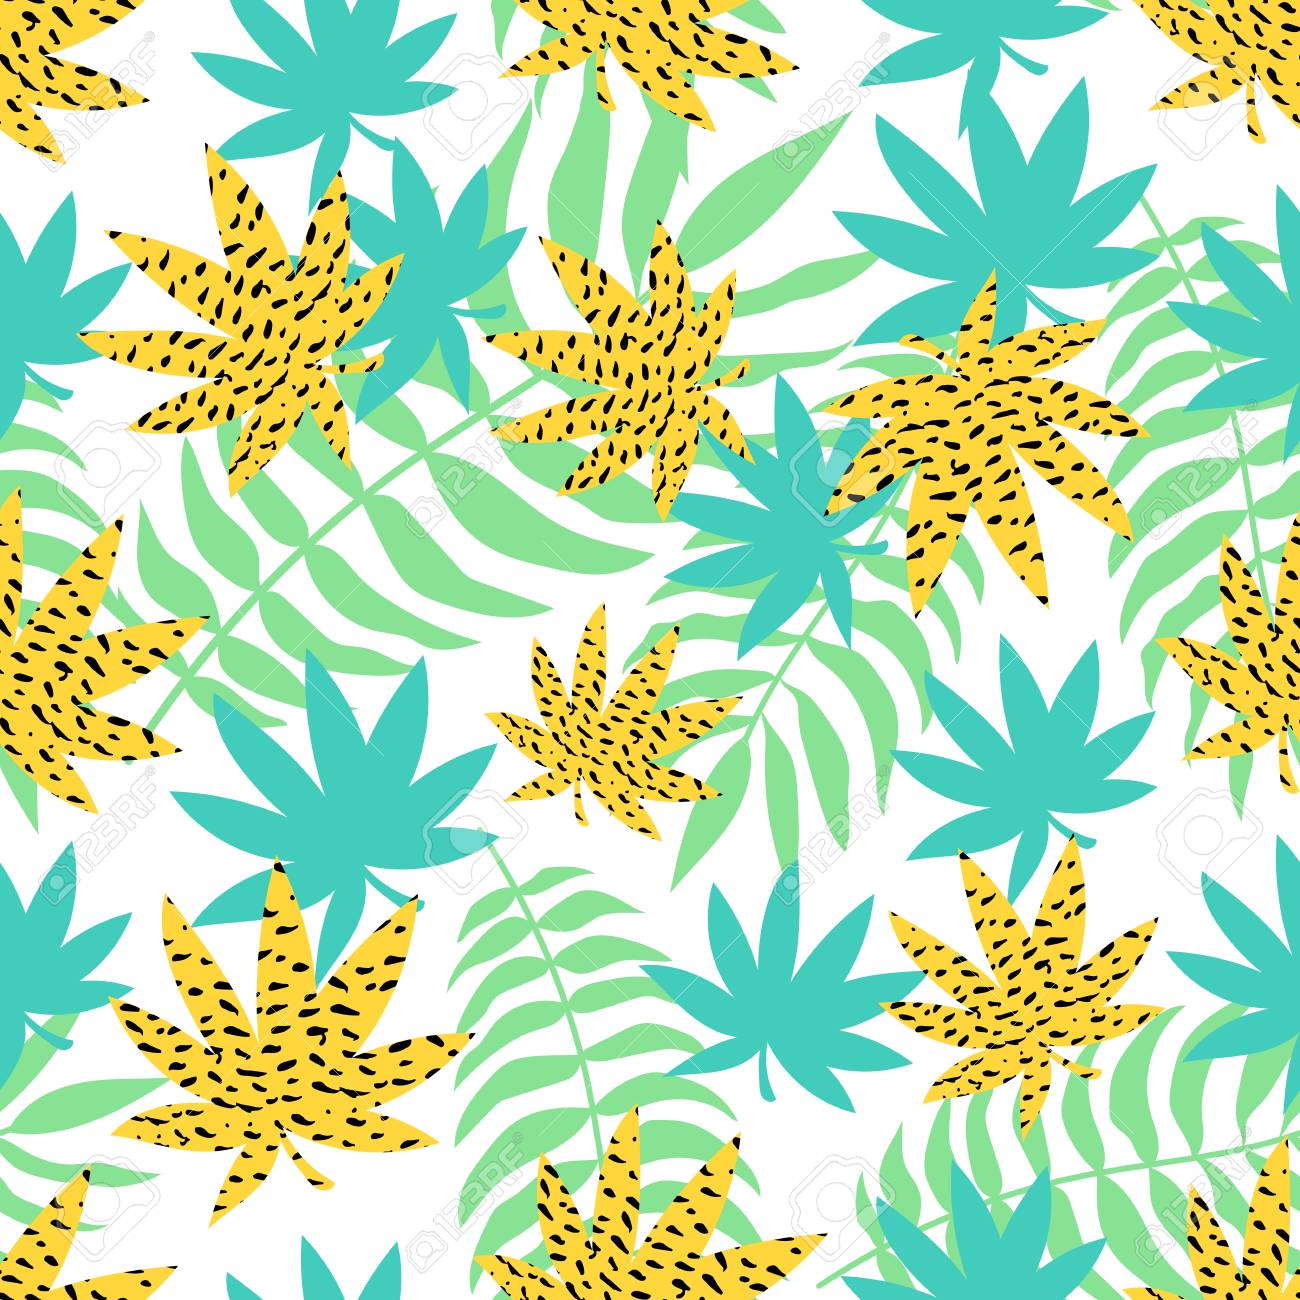 Seamless Summer Pattern Vector Background With Different Elements